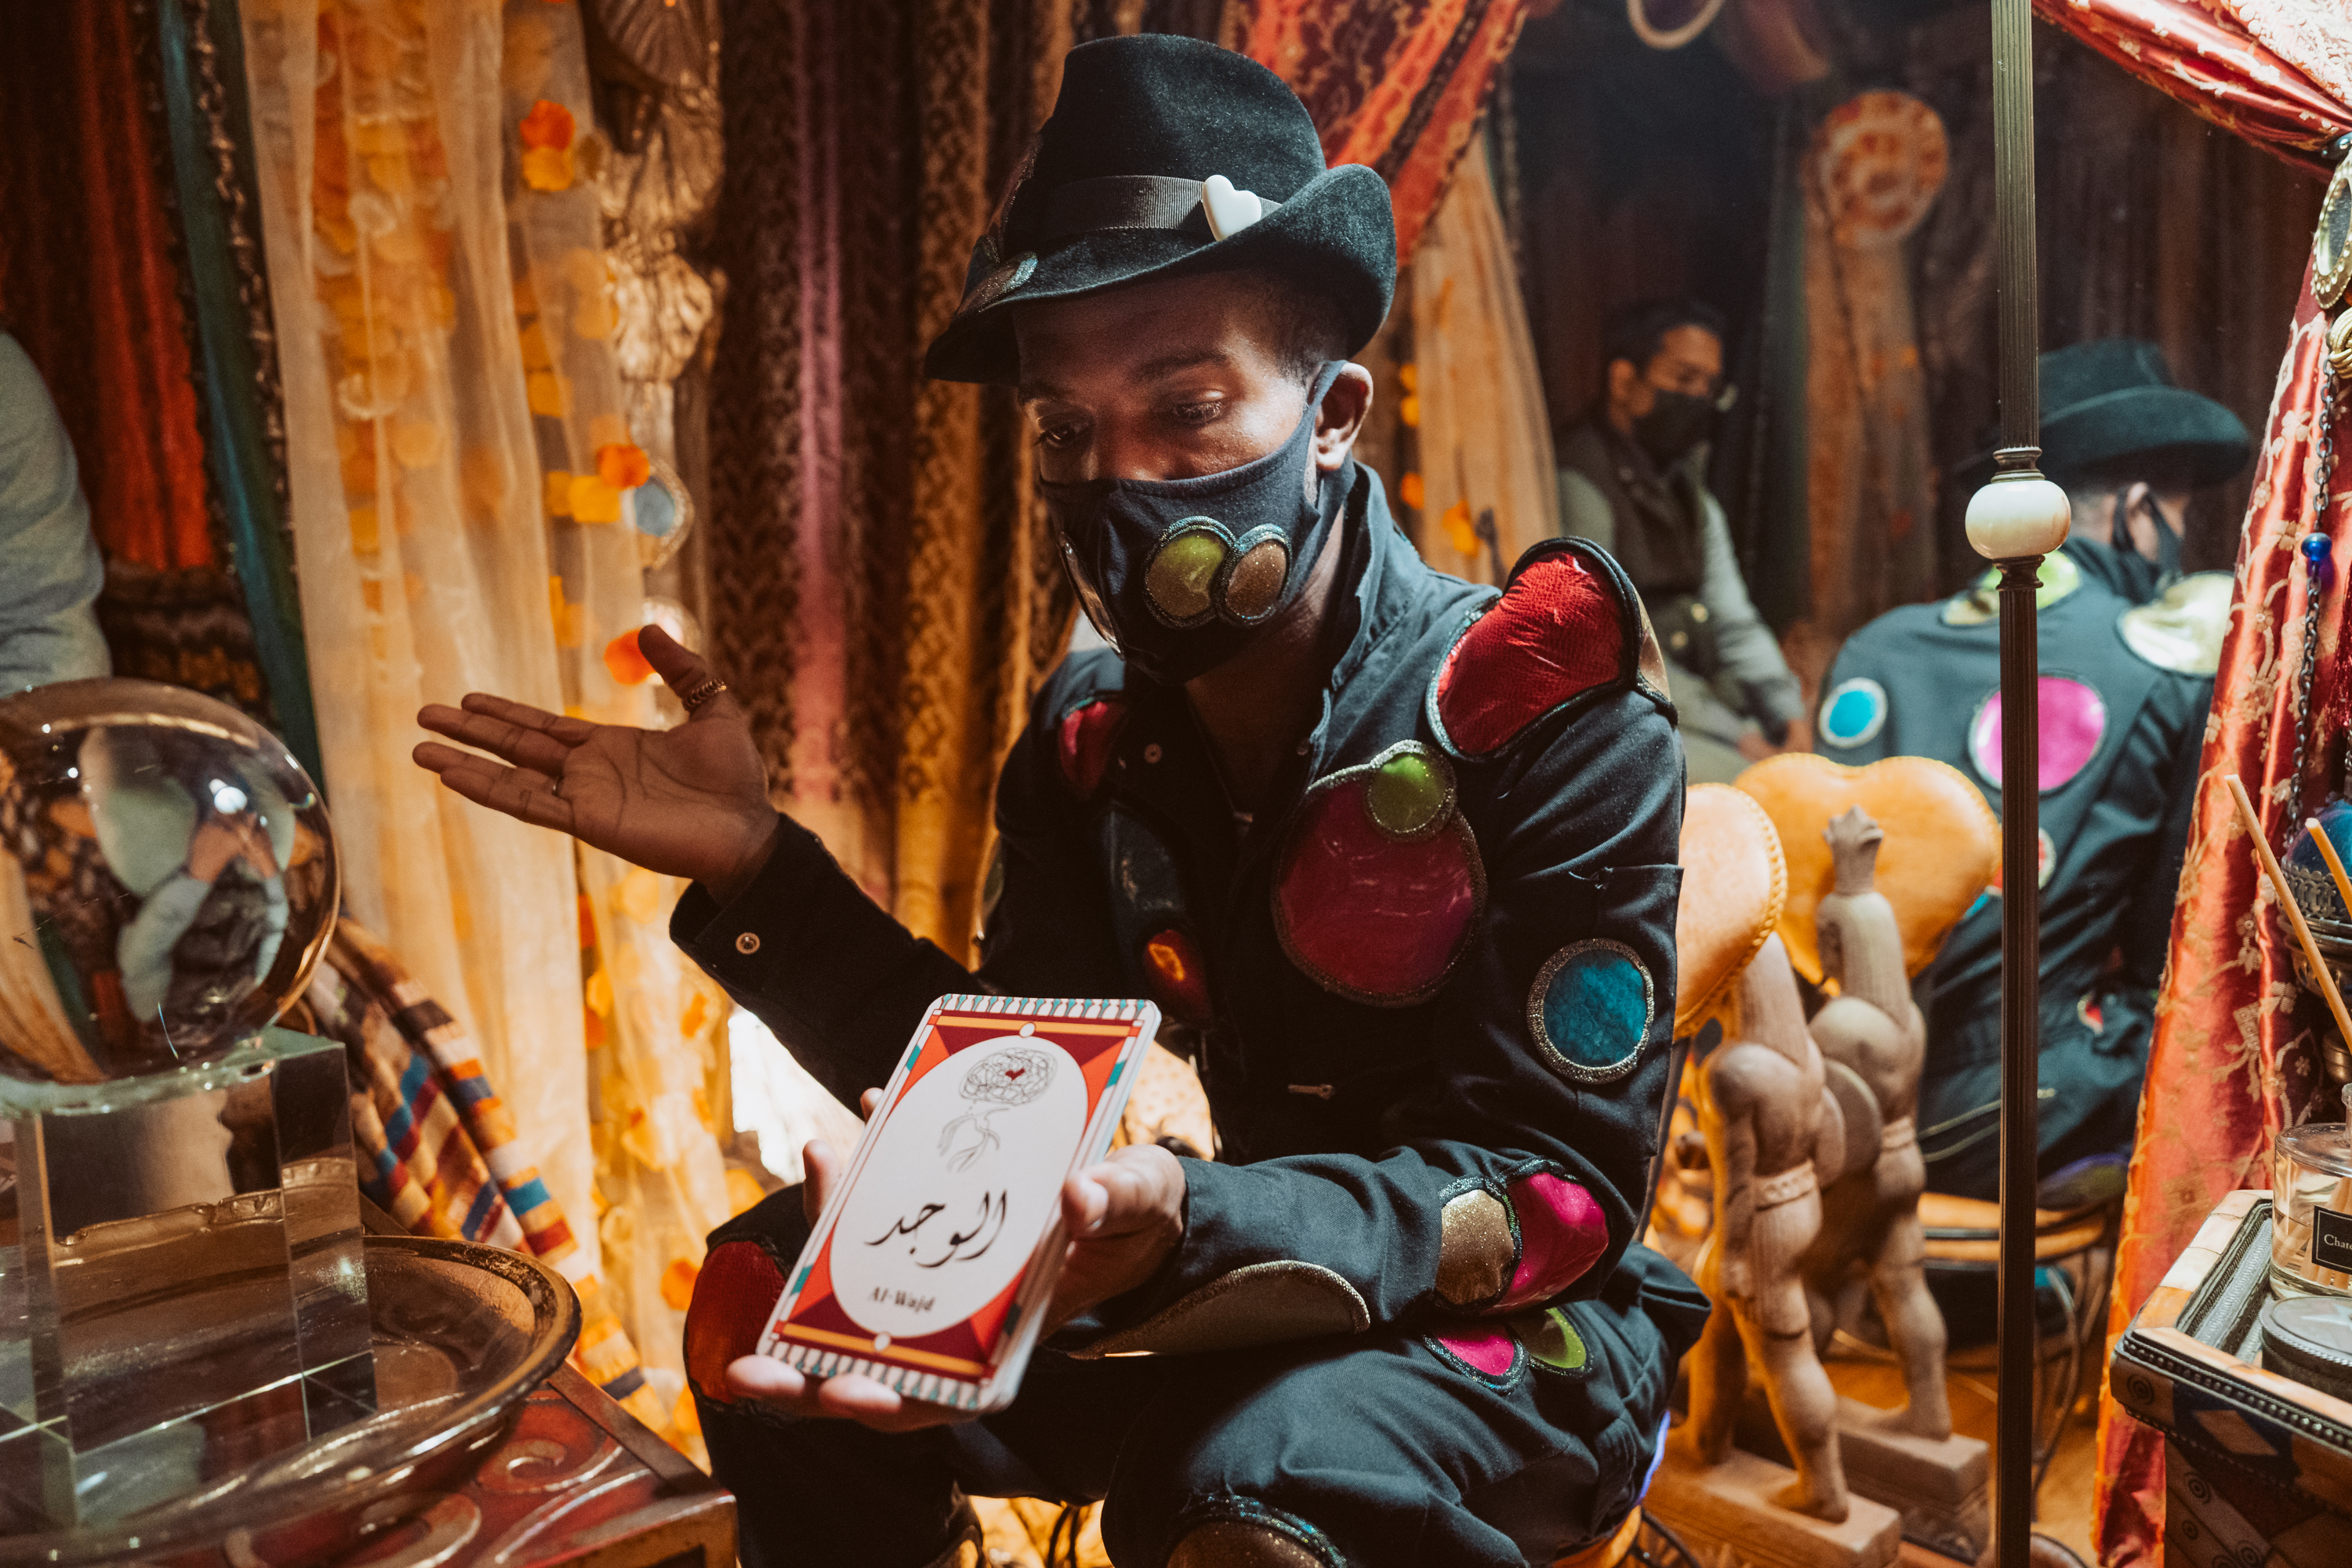 A person in a colorful, patch-adorned jacket showcasing a playing card, wearing a mask and hat, with a reflection and warm tones.